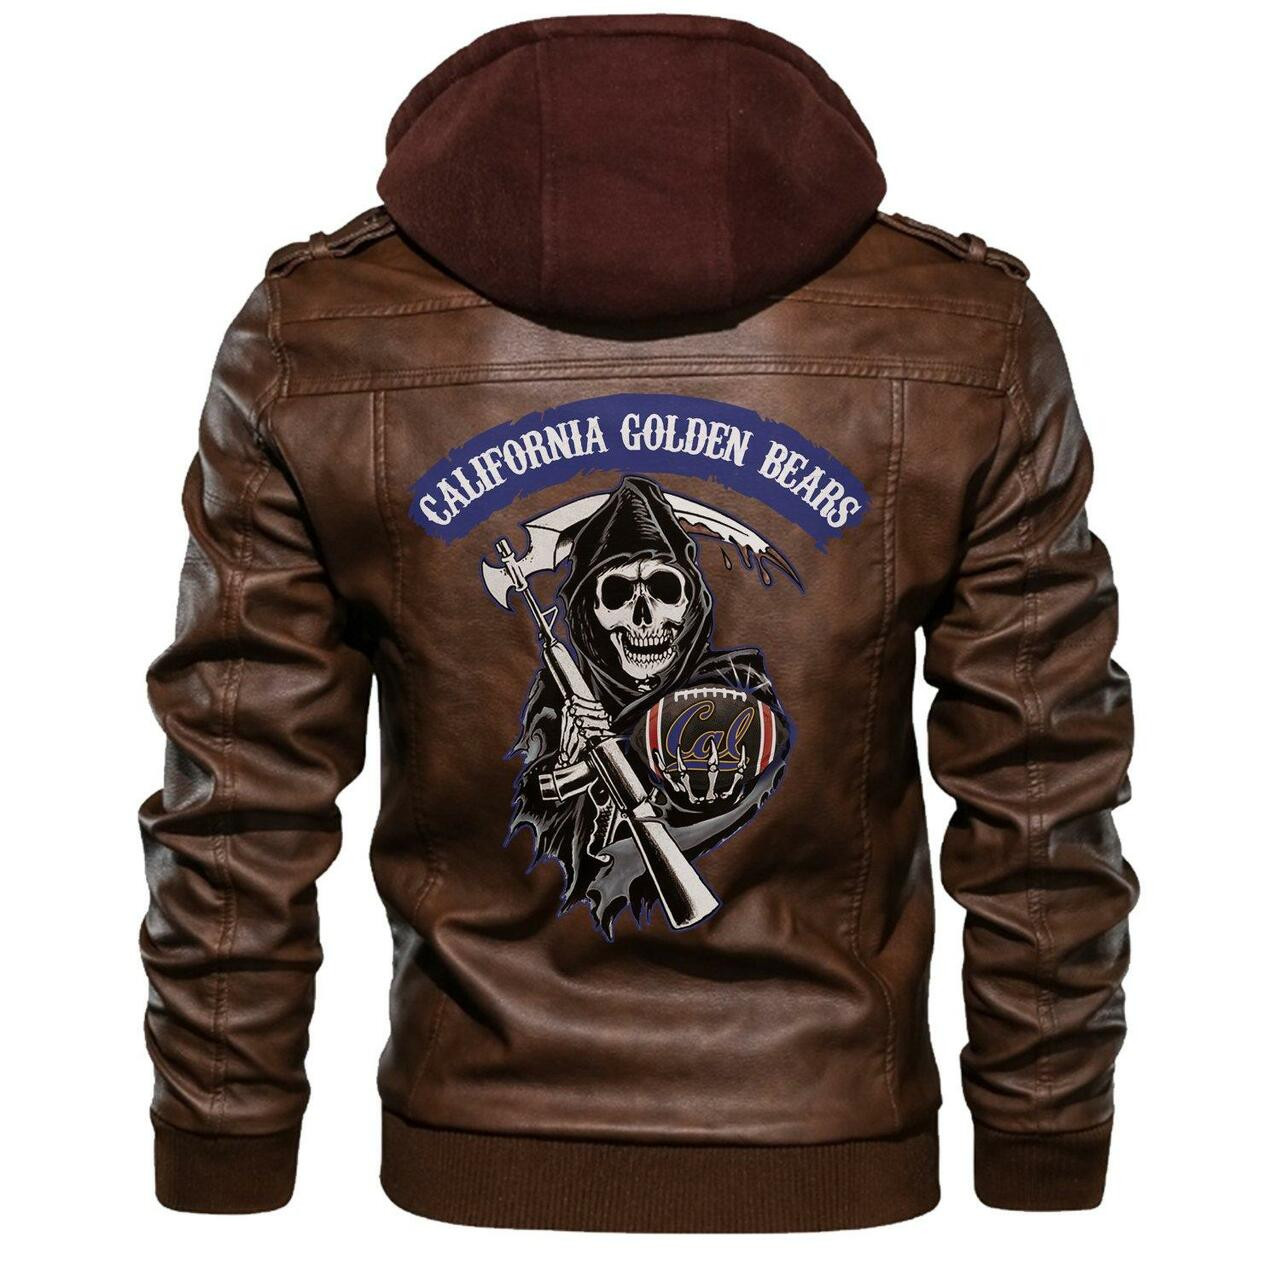 You'll get the best Leather Jacket by shopping online 39